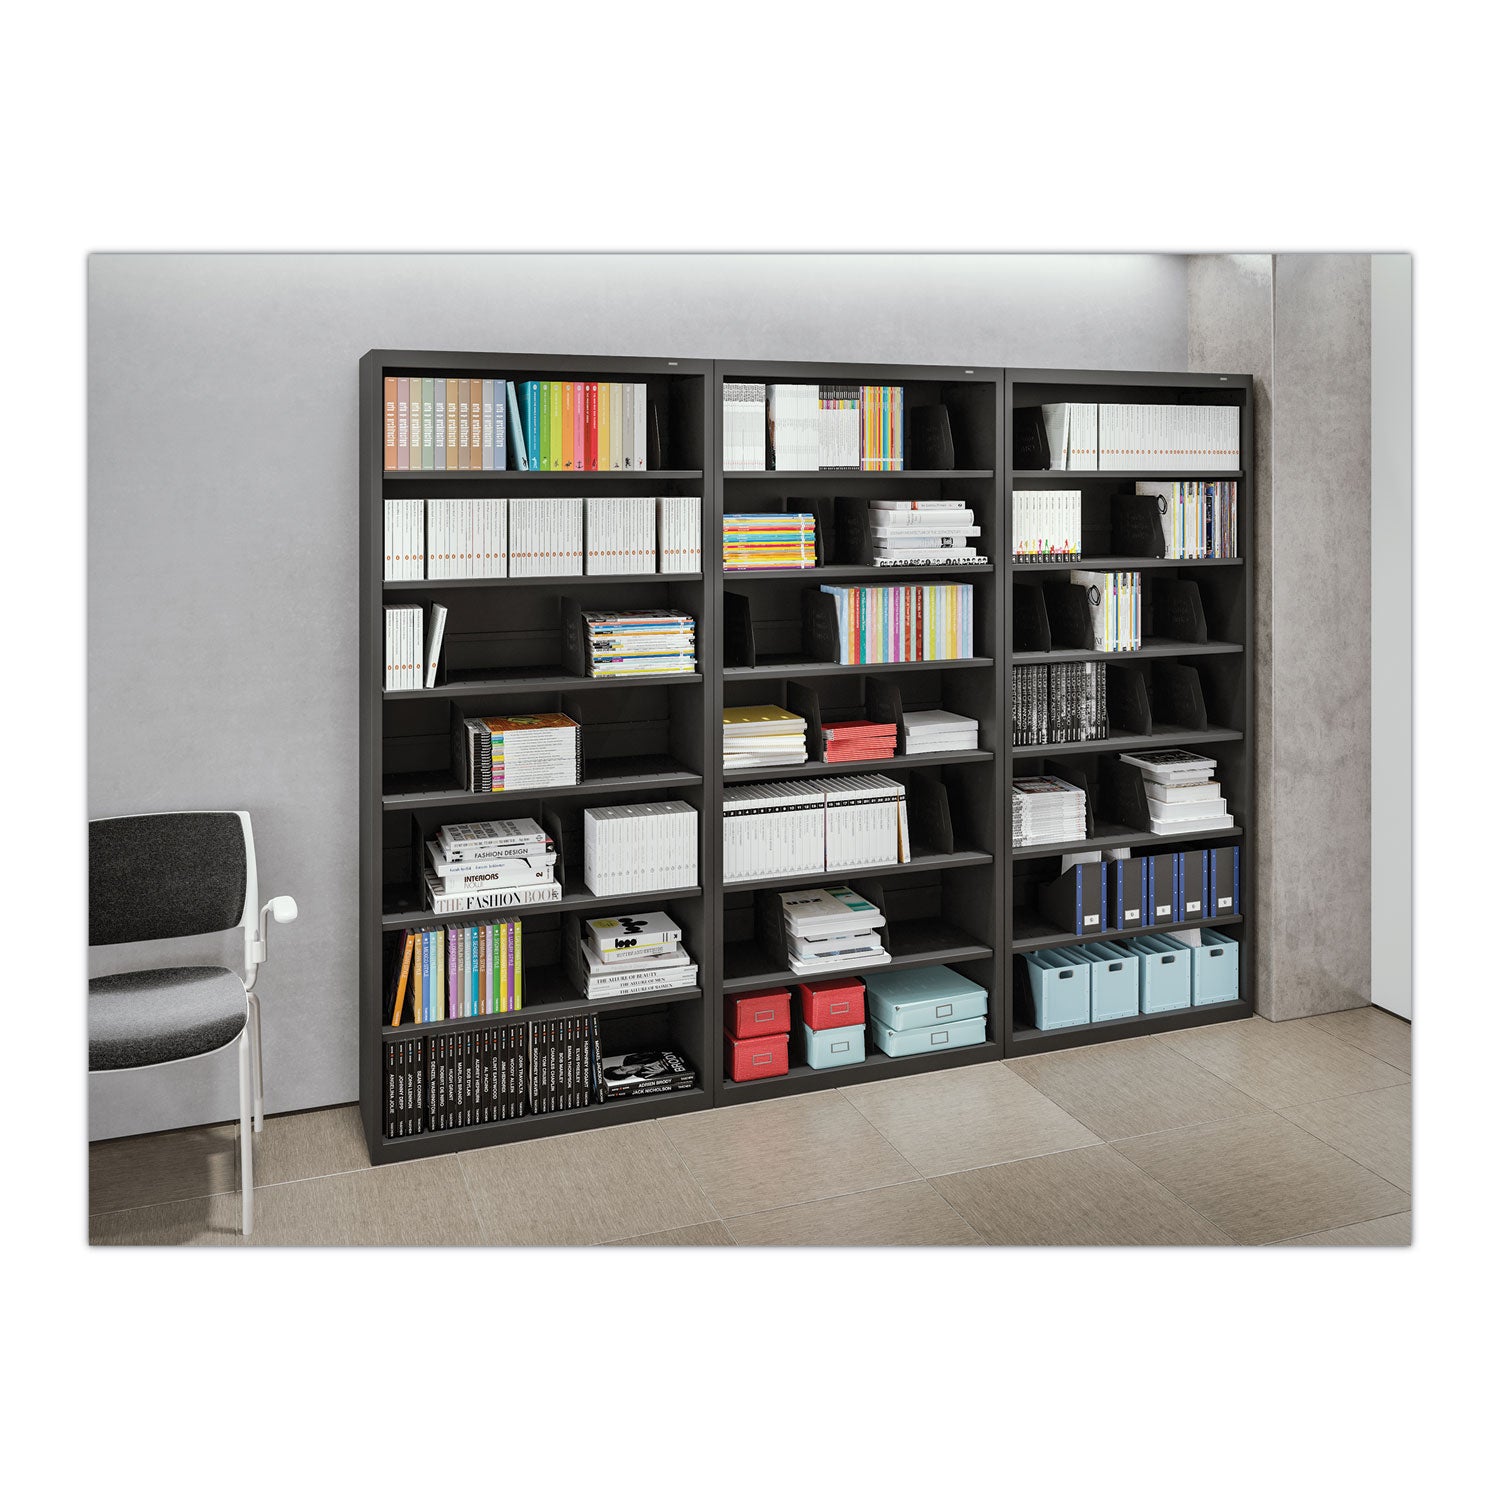 fixed-shelf-open-format-lateral-file-for-end-tab-folders-7-legal-letter-file-shelves-light-gray-36-x-165-x-87_tnnfs370lgy - 2